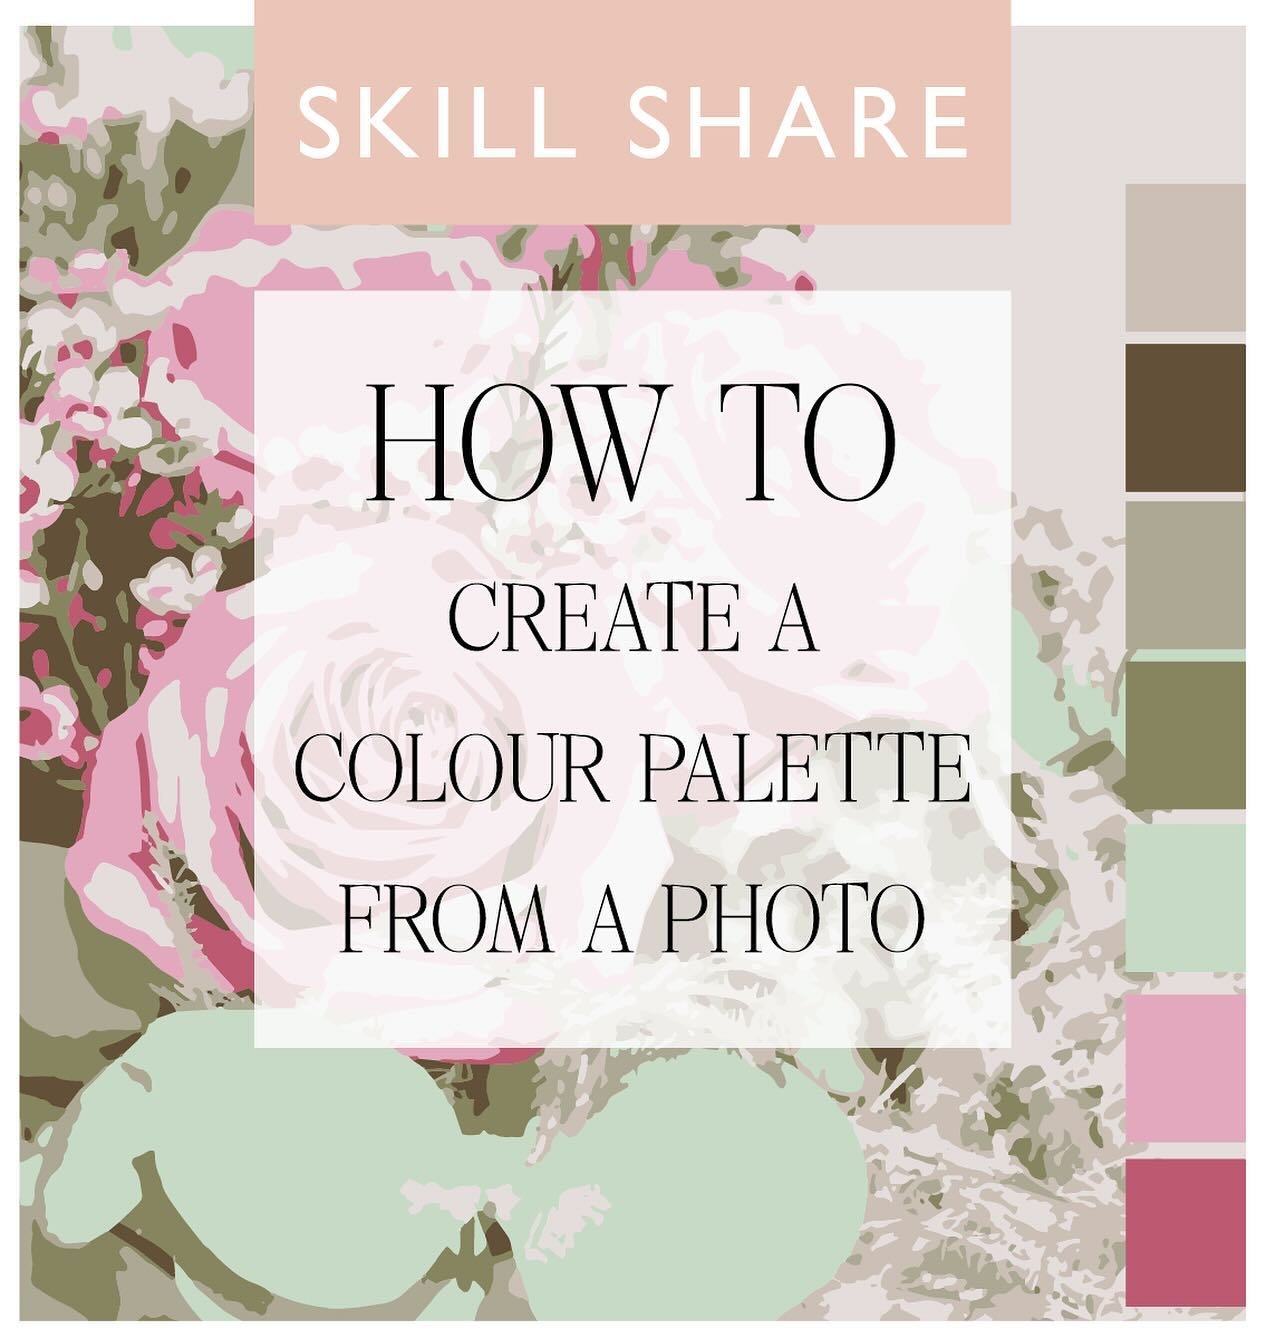 Creating a colour palette &gt;skillshare Tuesday this week is a lovely little tutorial on how to create a colour palette from a photograph in Adobe Illustrator. 
Swipe 👉🏼 to see the 2 videos. 

There&rsquo;s also a free generator if you don&rsquo;t